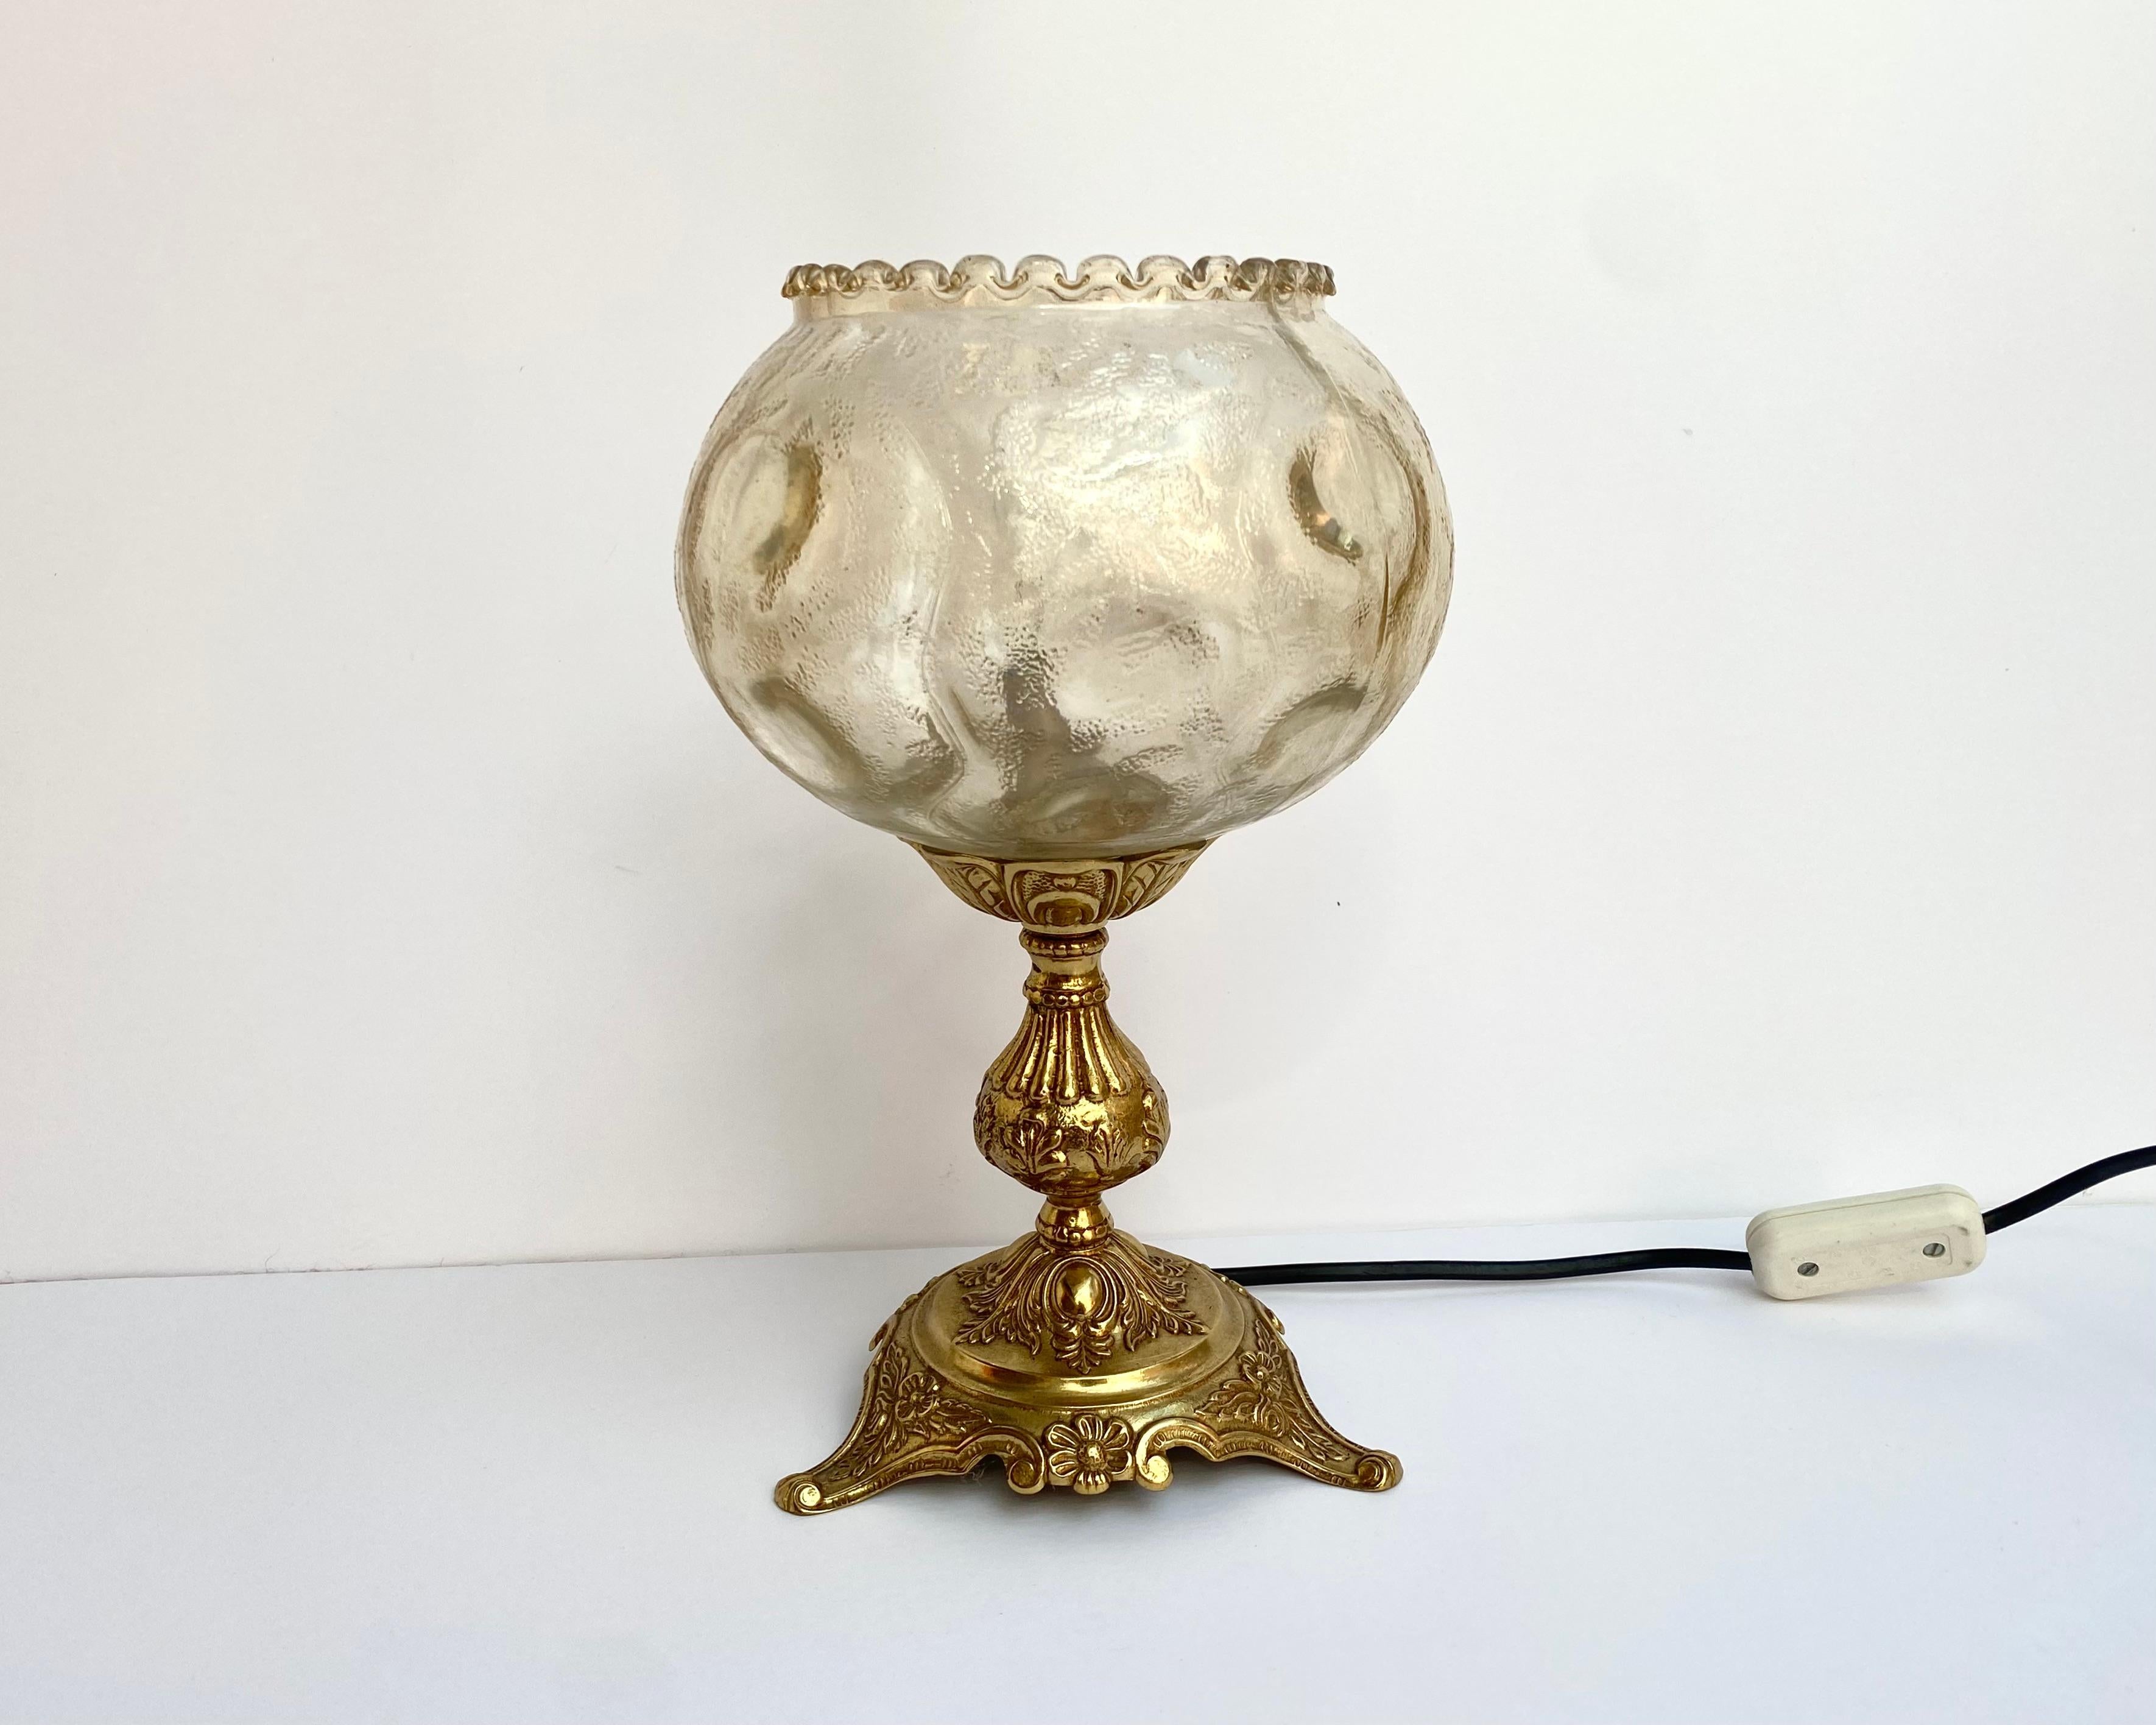 Very Beautiful mid-century lamp on a gold repulsed brass base finished by a shortbread glass from the Belgian manufacturer.

The lampshades are open balls with a subtle, beautiful pattern and a very light tint.

Glass and brass table lamp is a rich